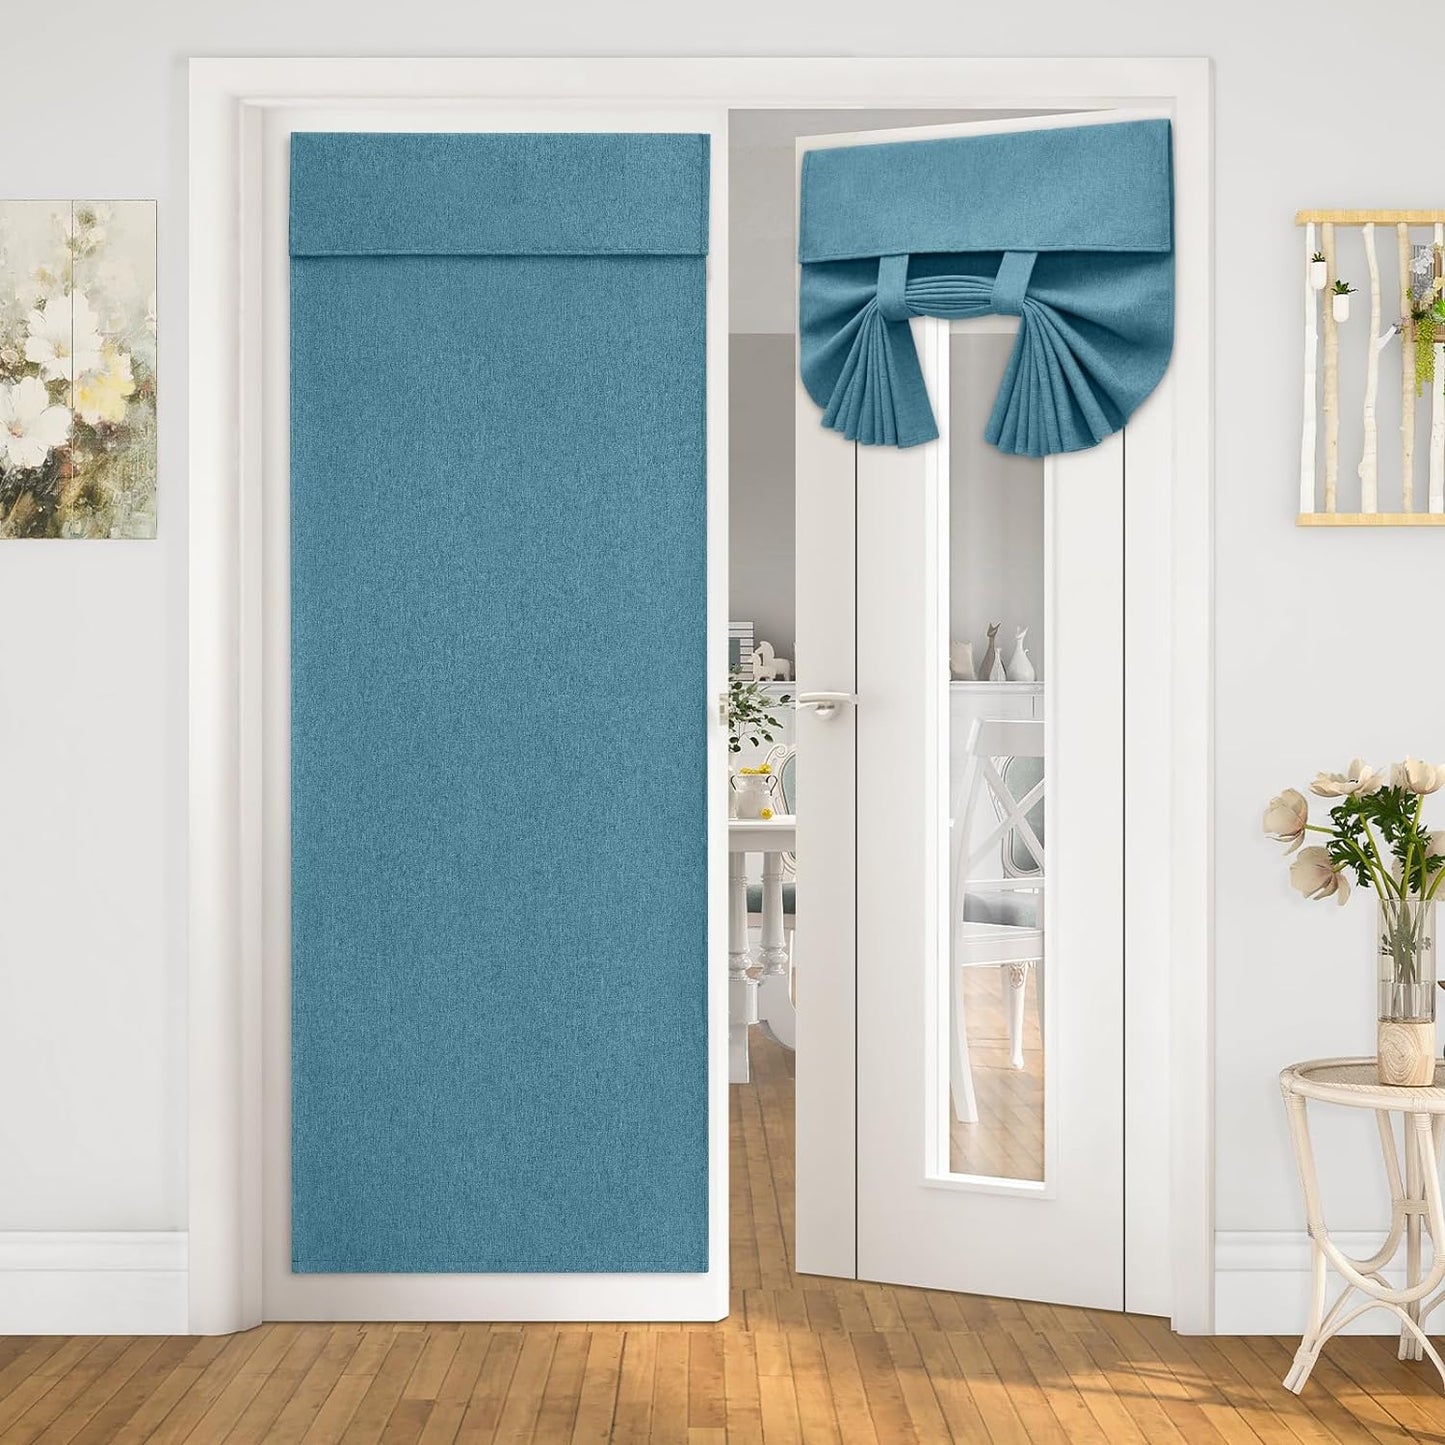 HOMEIDEAS Natural Linen French Door Curtains, Privacy Door Window Curtains Panel, French Door Shade for Door Window, Thermal Insulated Door Window Covering for Bedroom, W26 X L40 Inch, 1 Panel  HOMEIDEAS Turquoise 1 Panel-W26" X L68" 